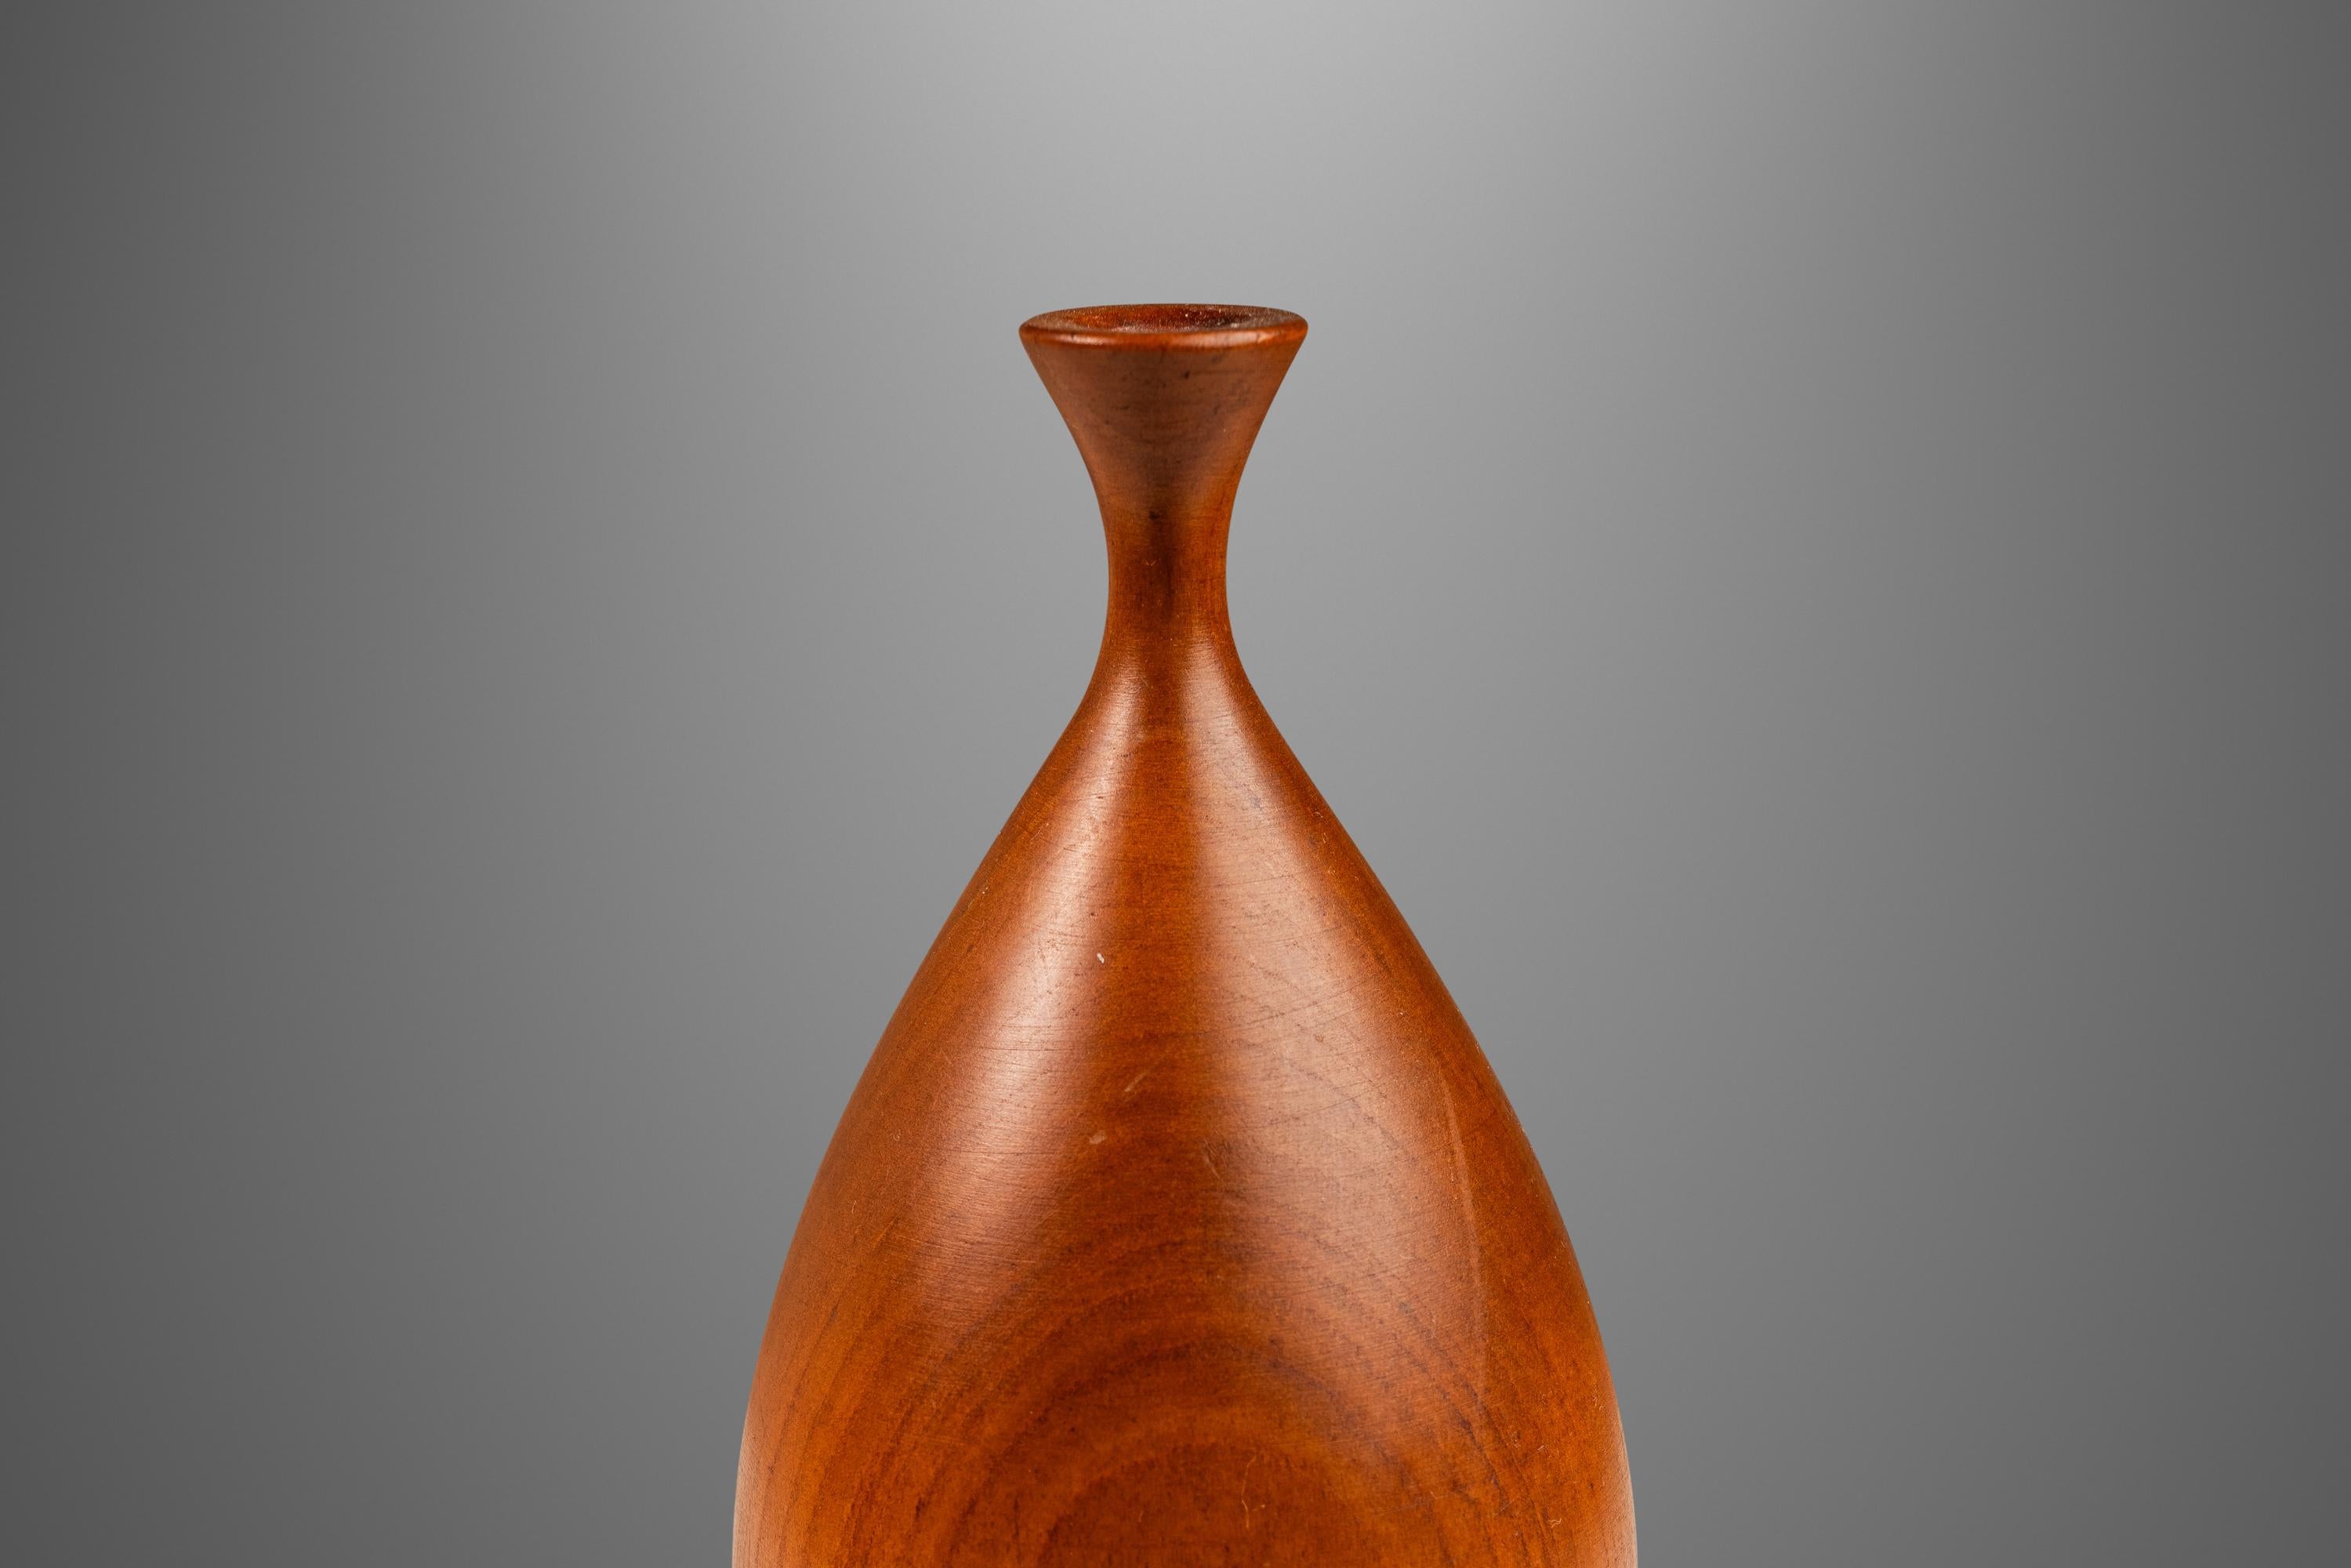 Signed Petite Wood-Turned Vase in solid Walnut by George Biersdorf, USA, c. 1979 For Sale 7